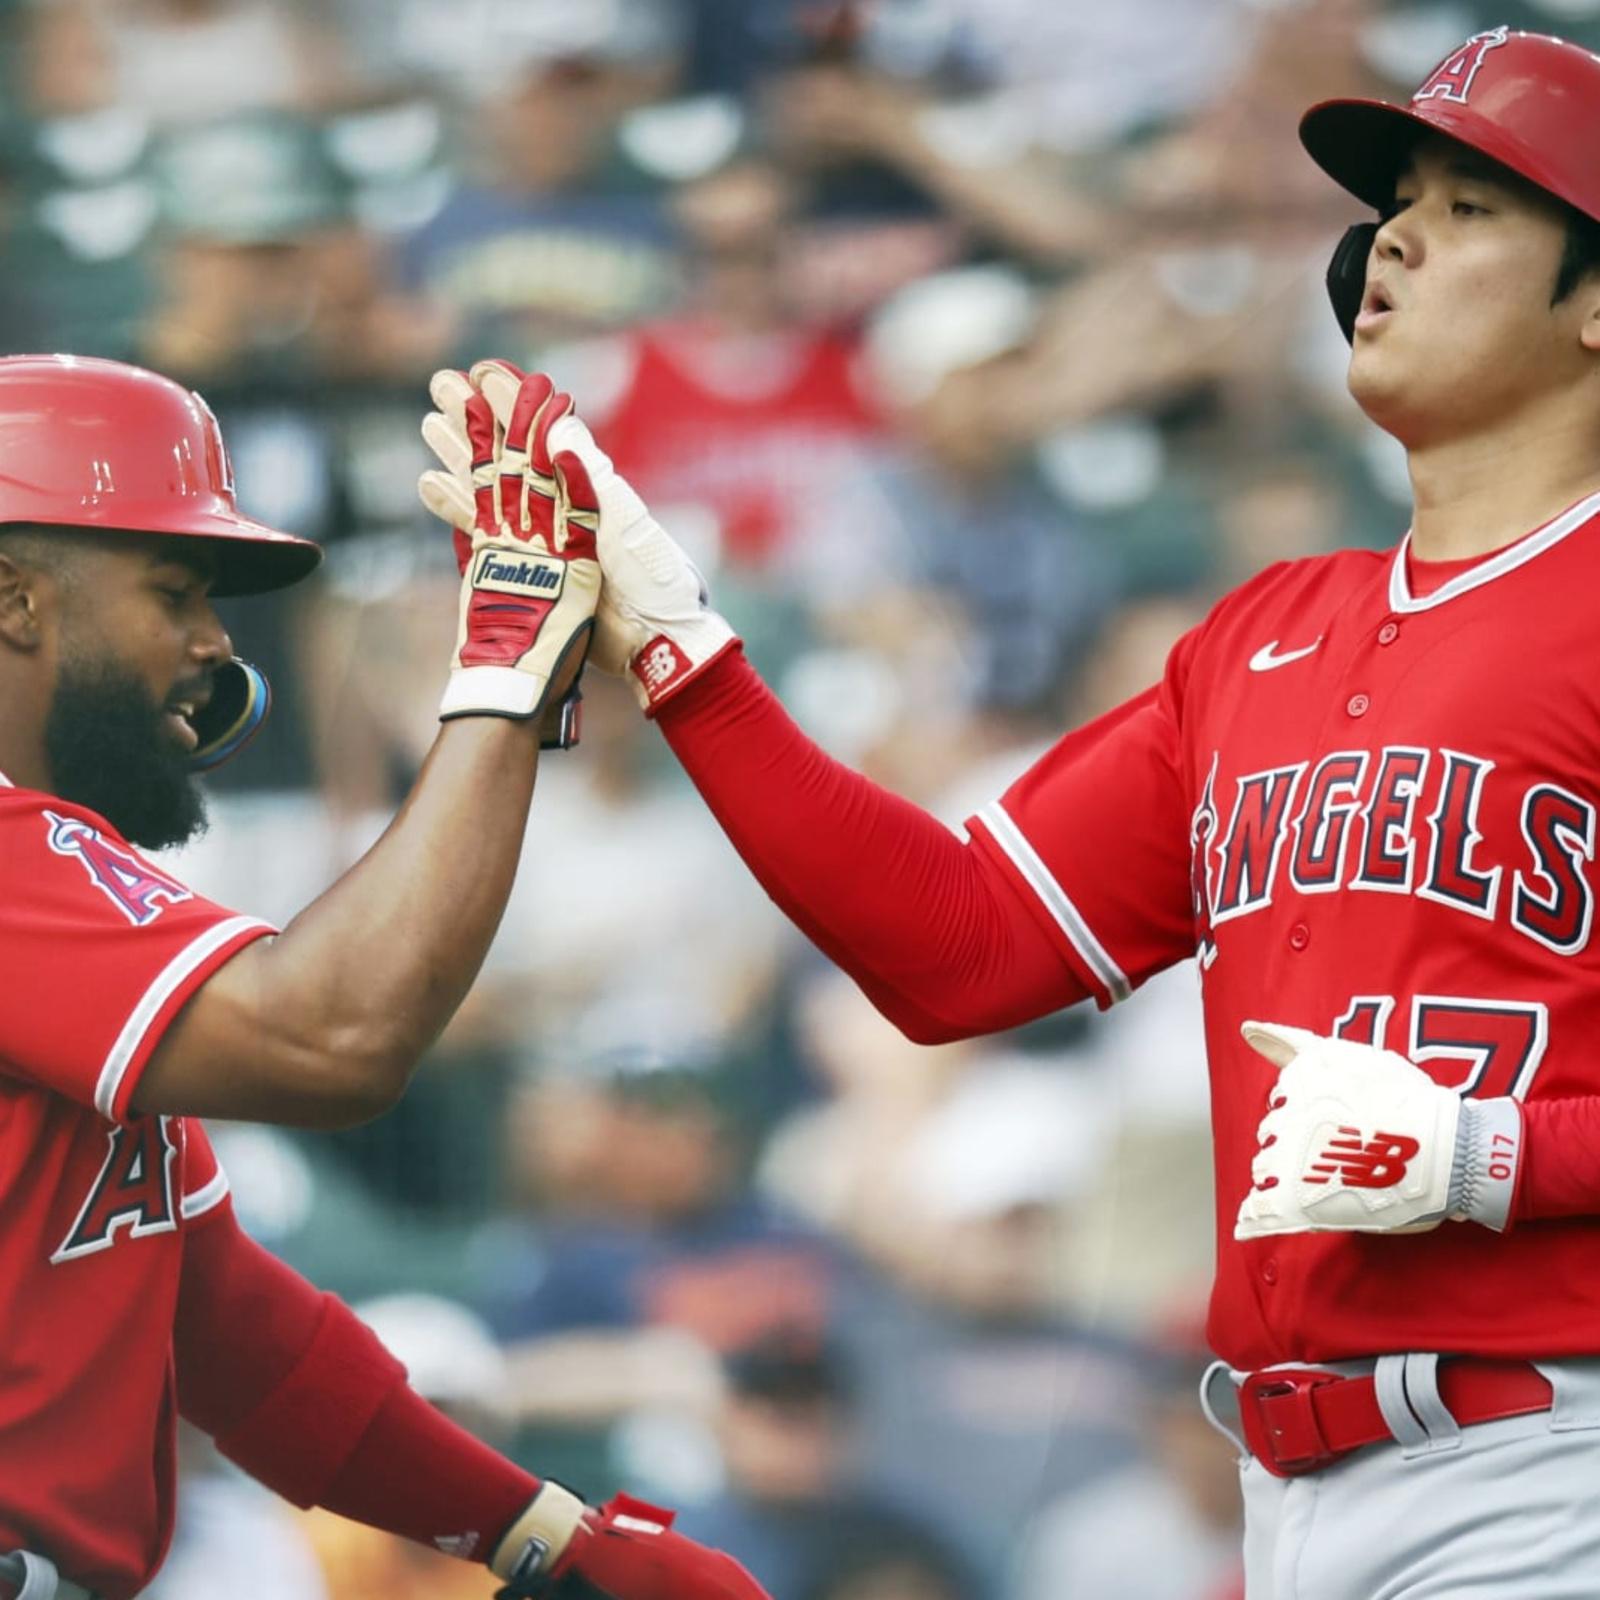 Angels' star Shohei Ohtani finishes with best-selling jersey - ESPN